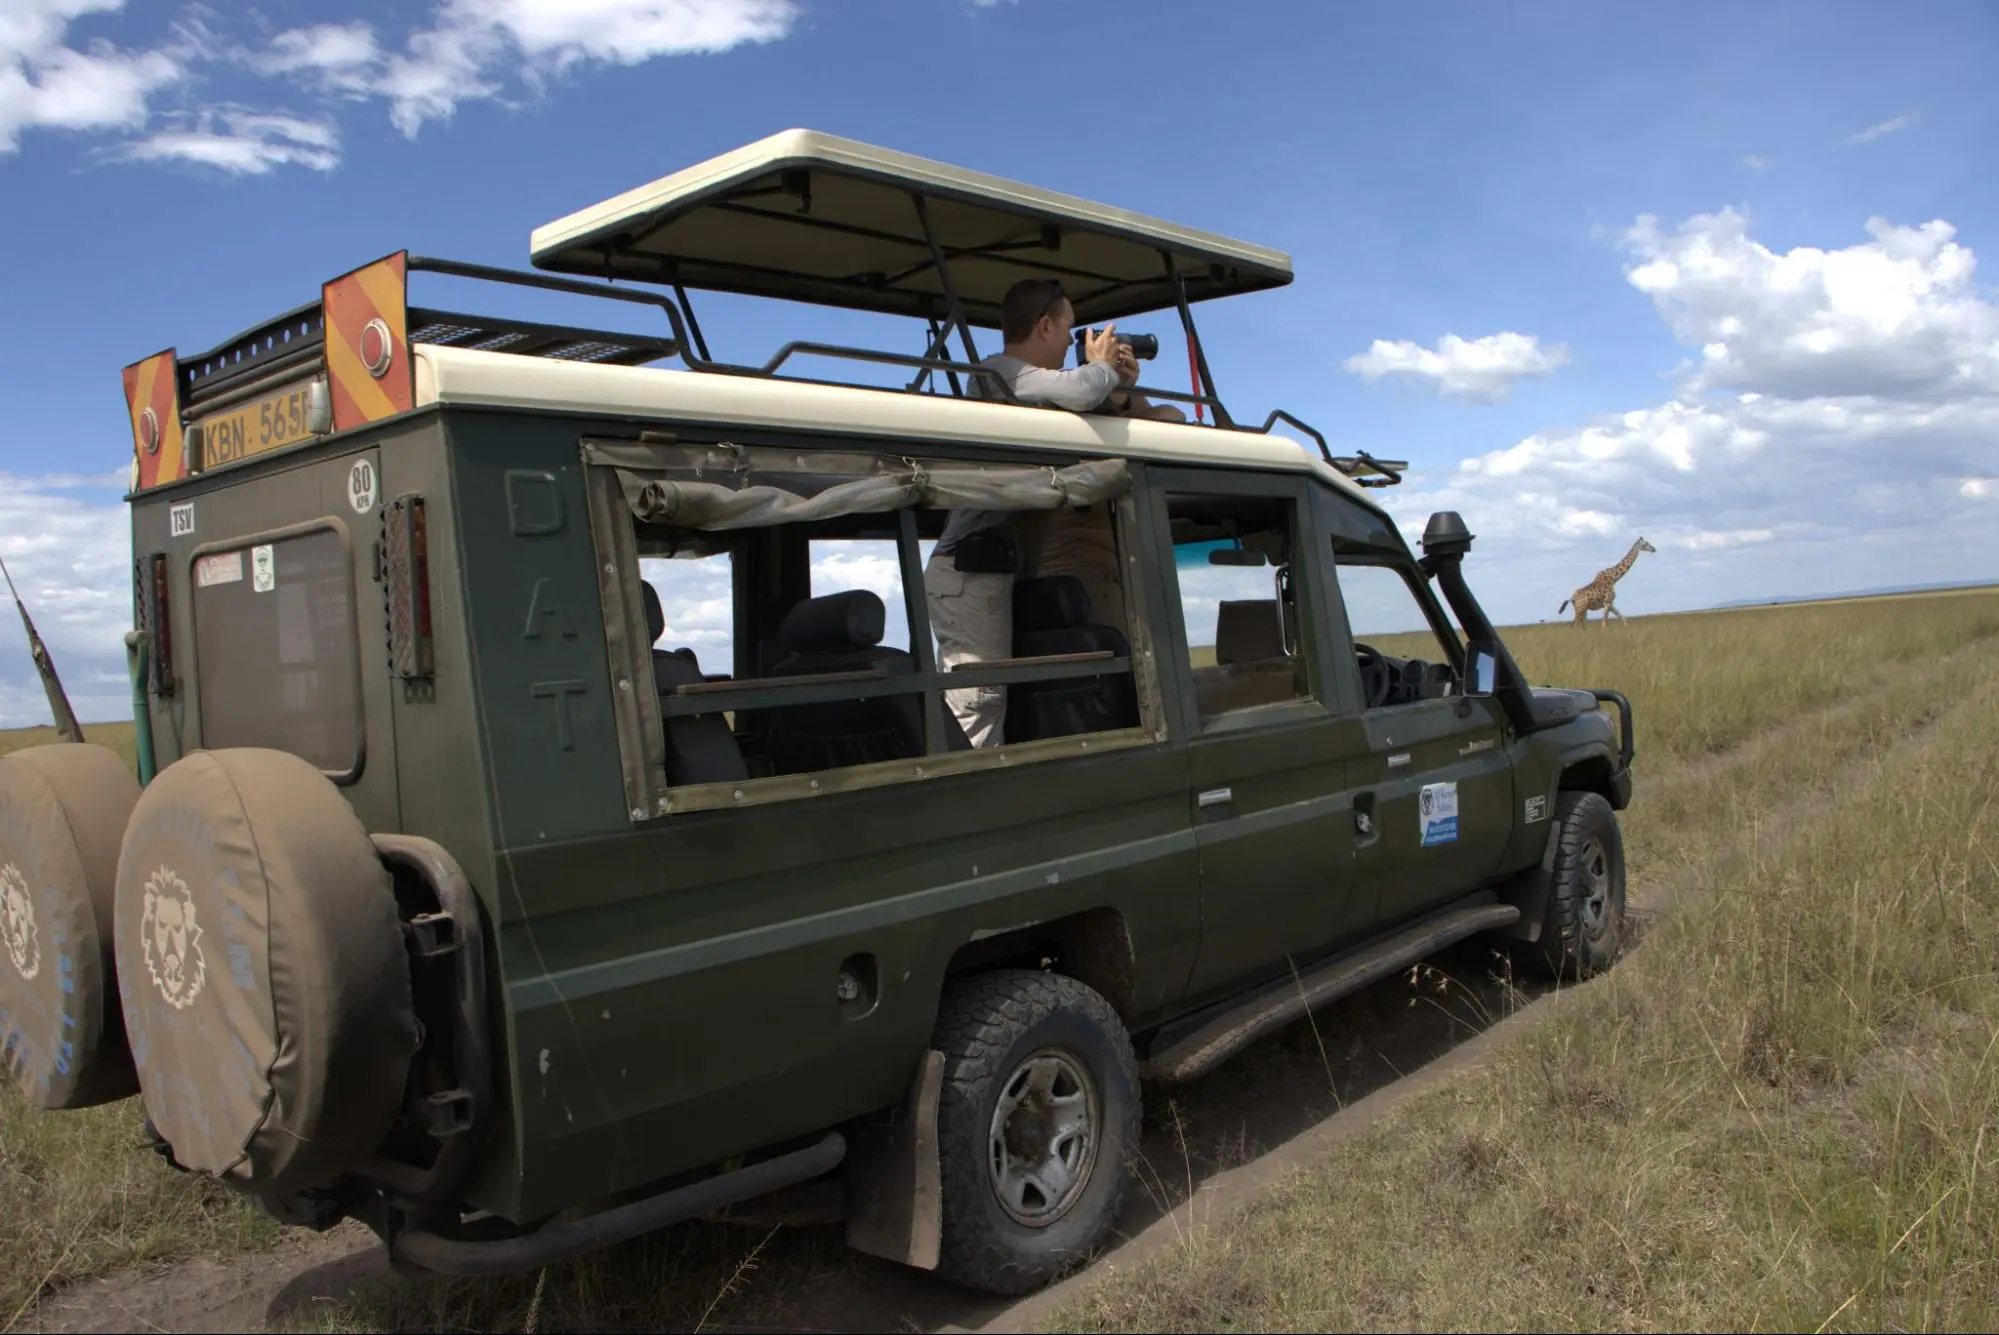 Serengeti Tour Packages - Game drives in Serengeti